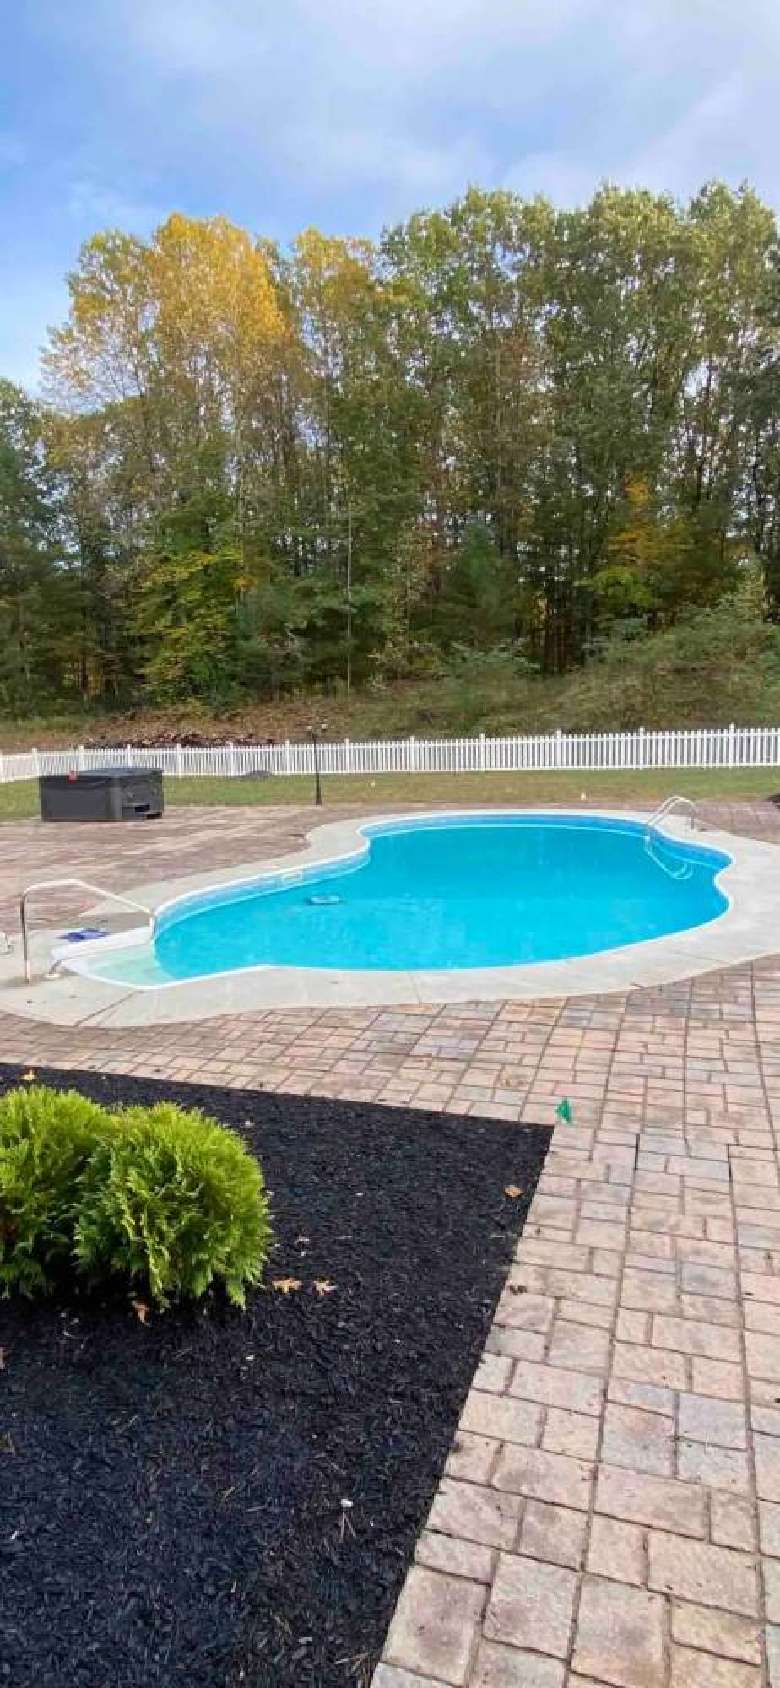 An in ground heated pool and hot tub with large fenced in backyard